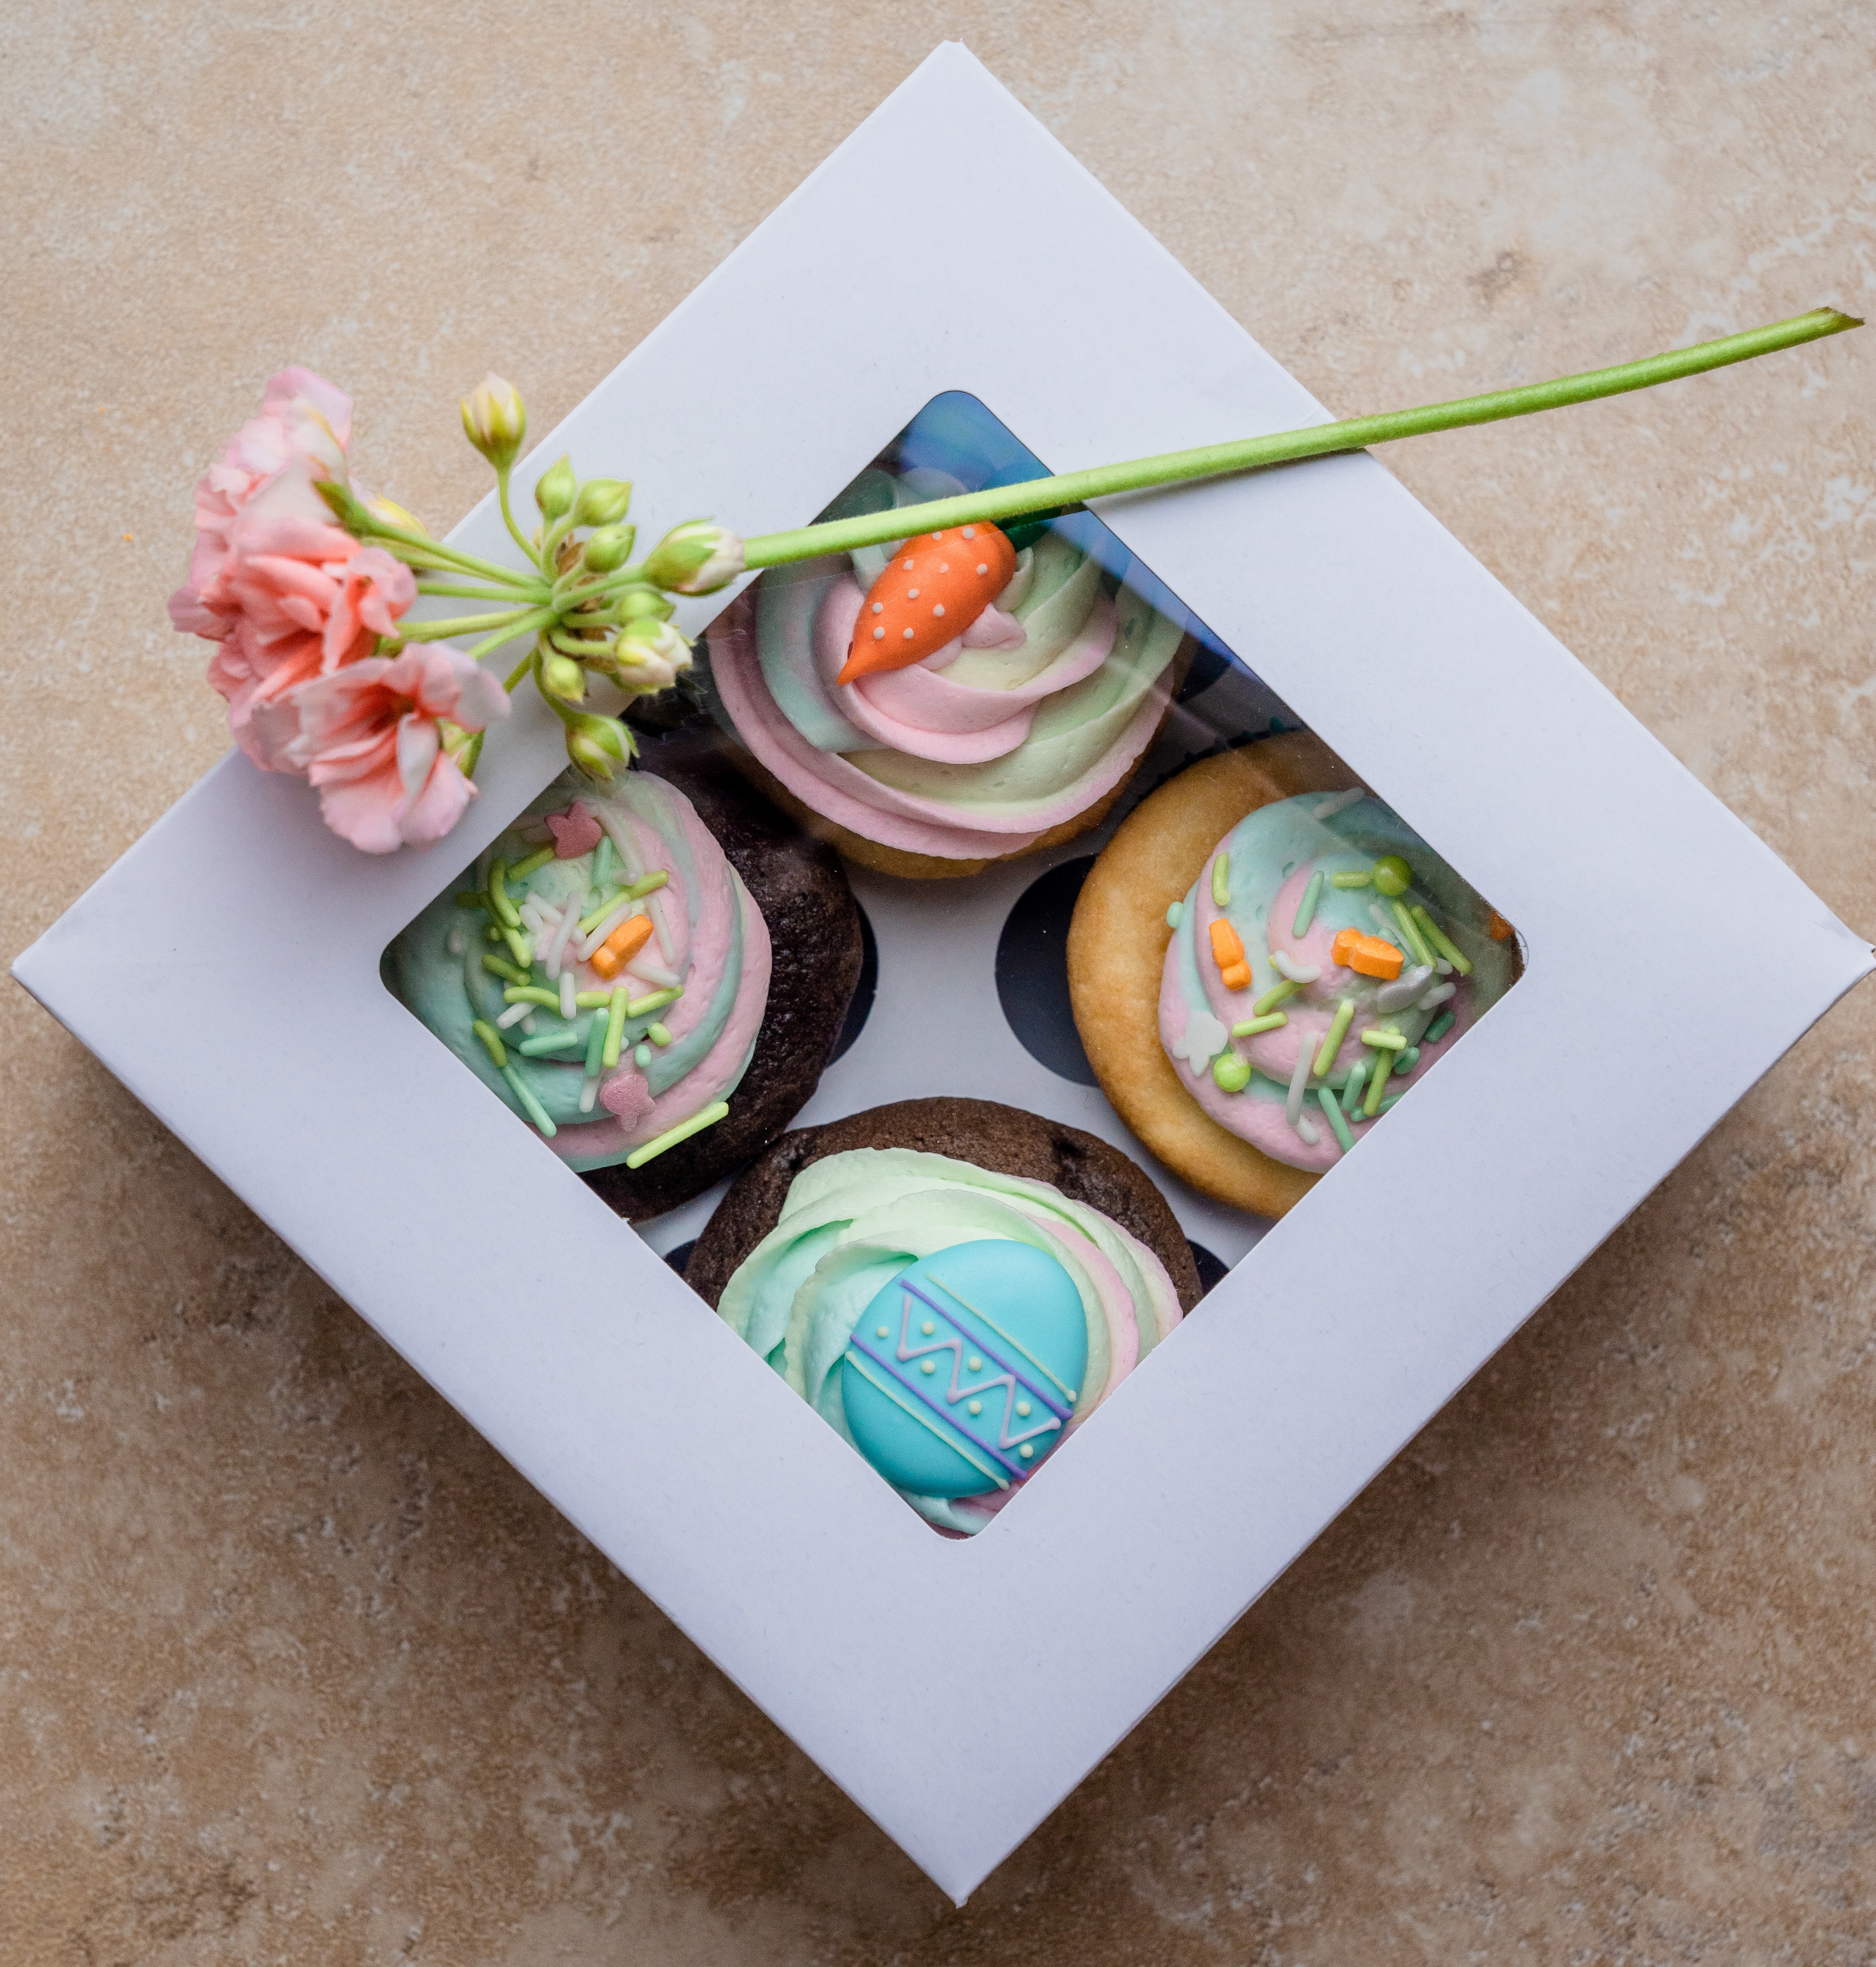 A cute cardboard box of Easter-themed cupcakes, with a stem of pink blossoms lying on top.